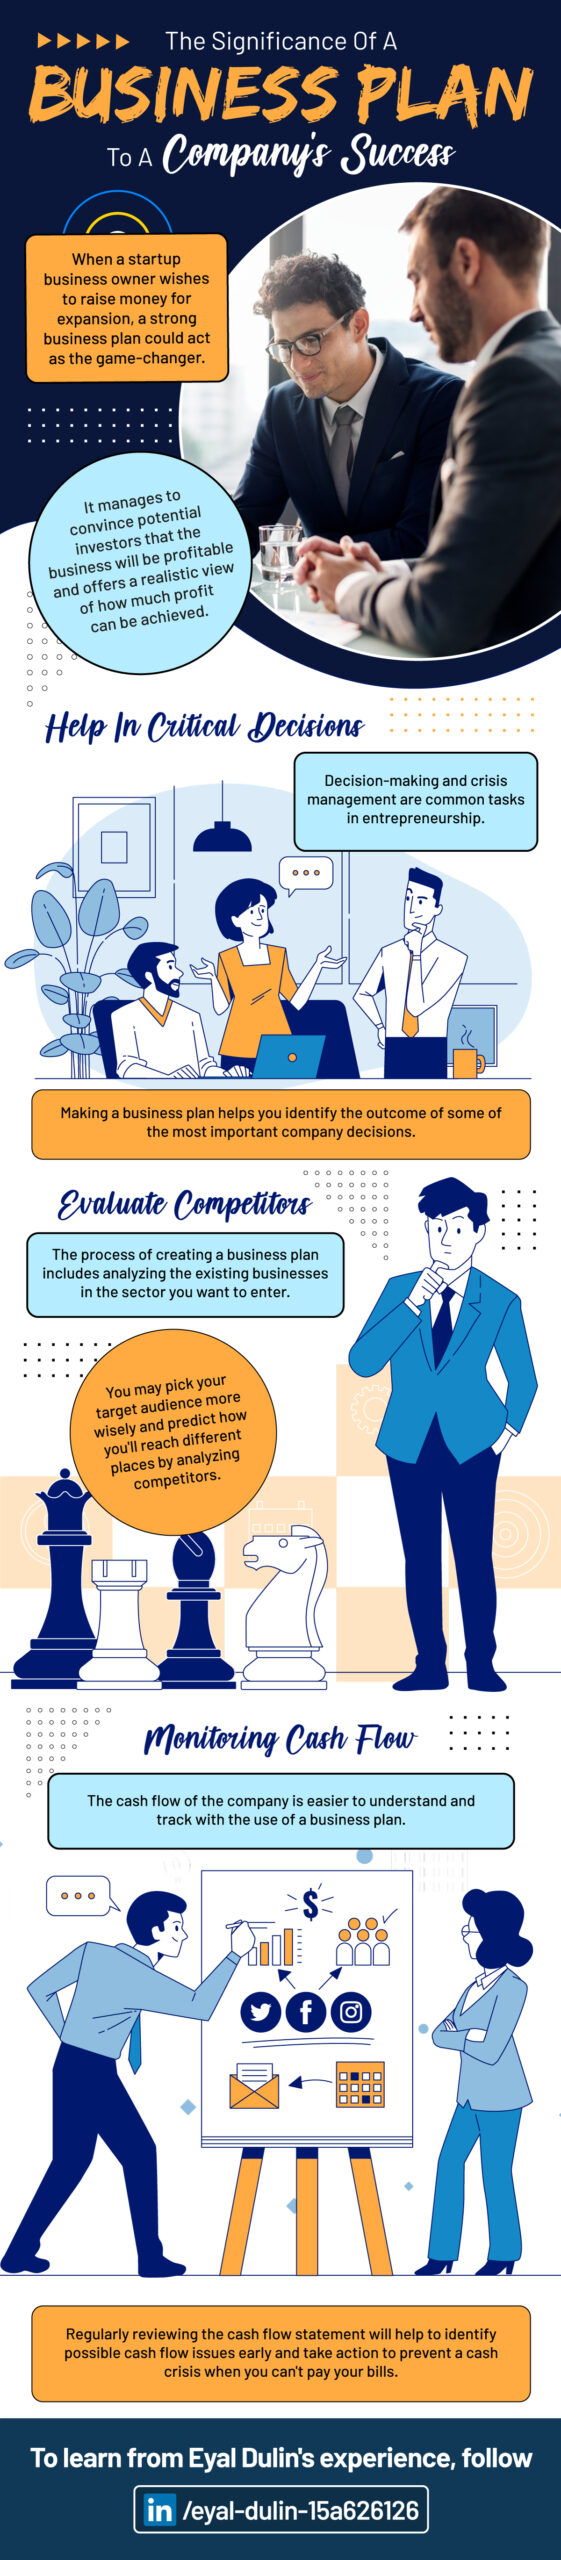 The Significance Of A Business Plan